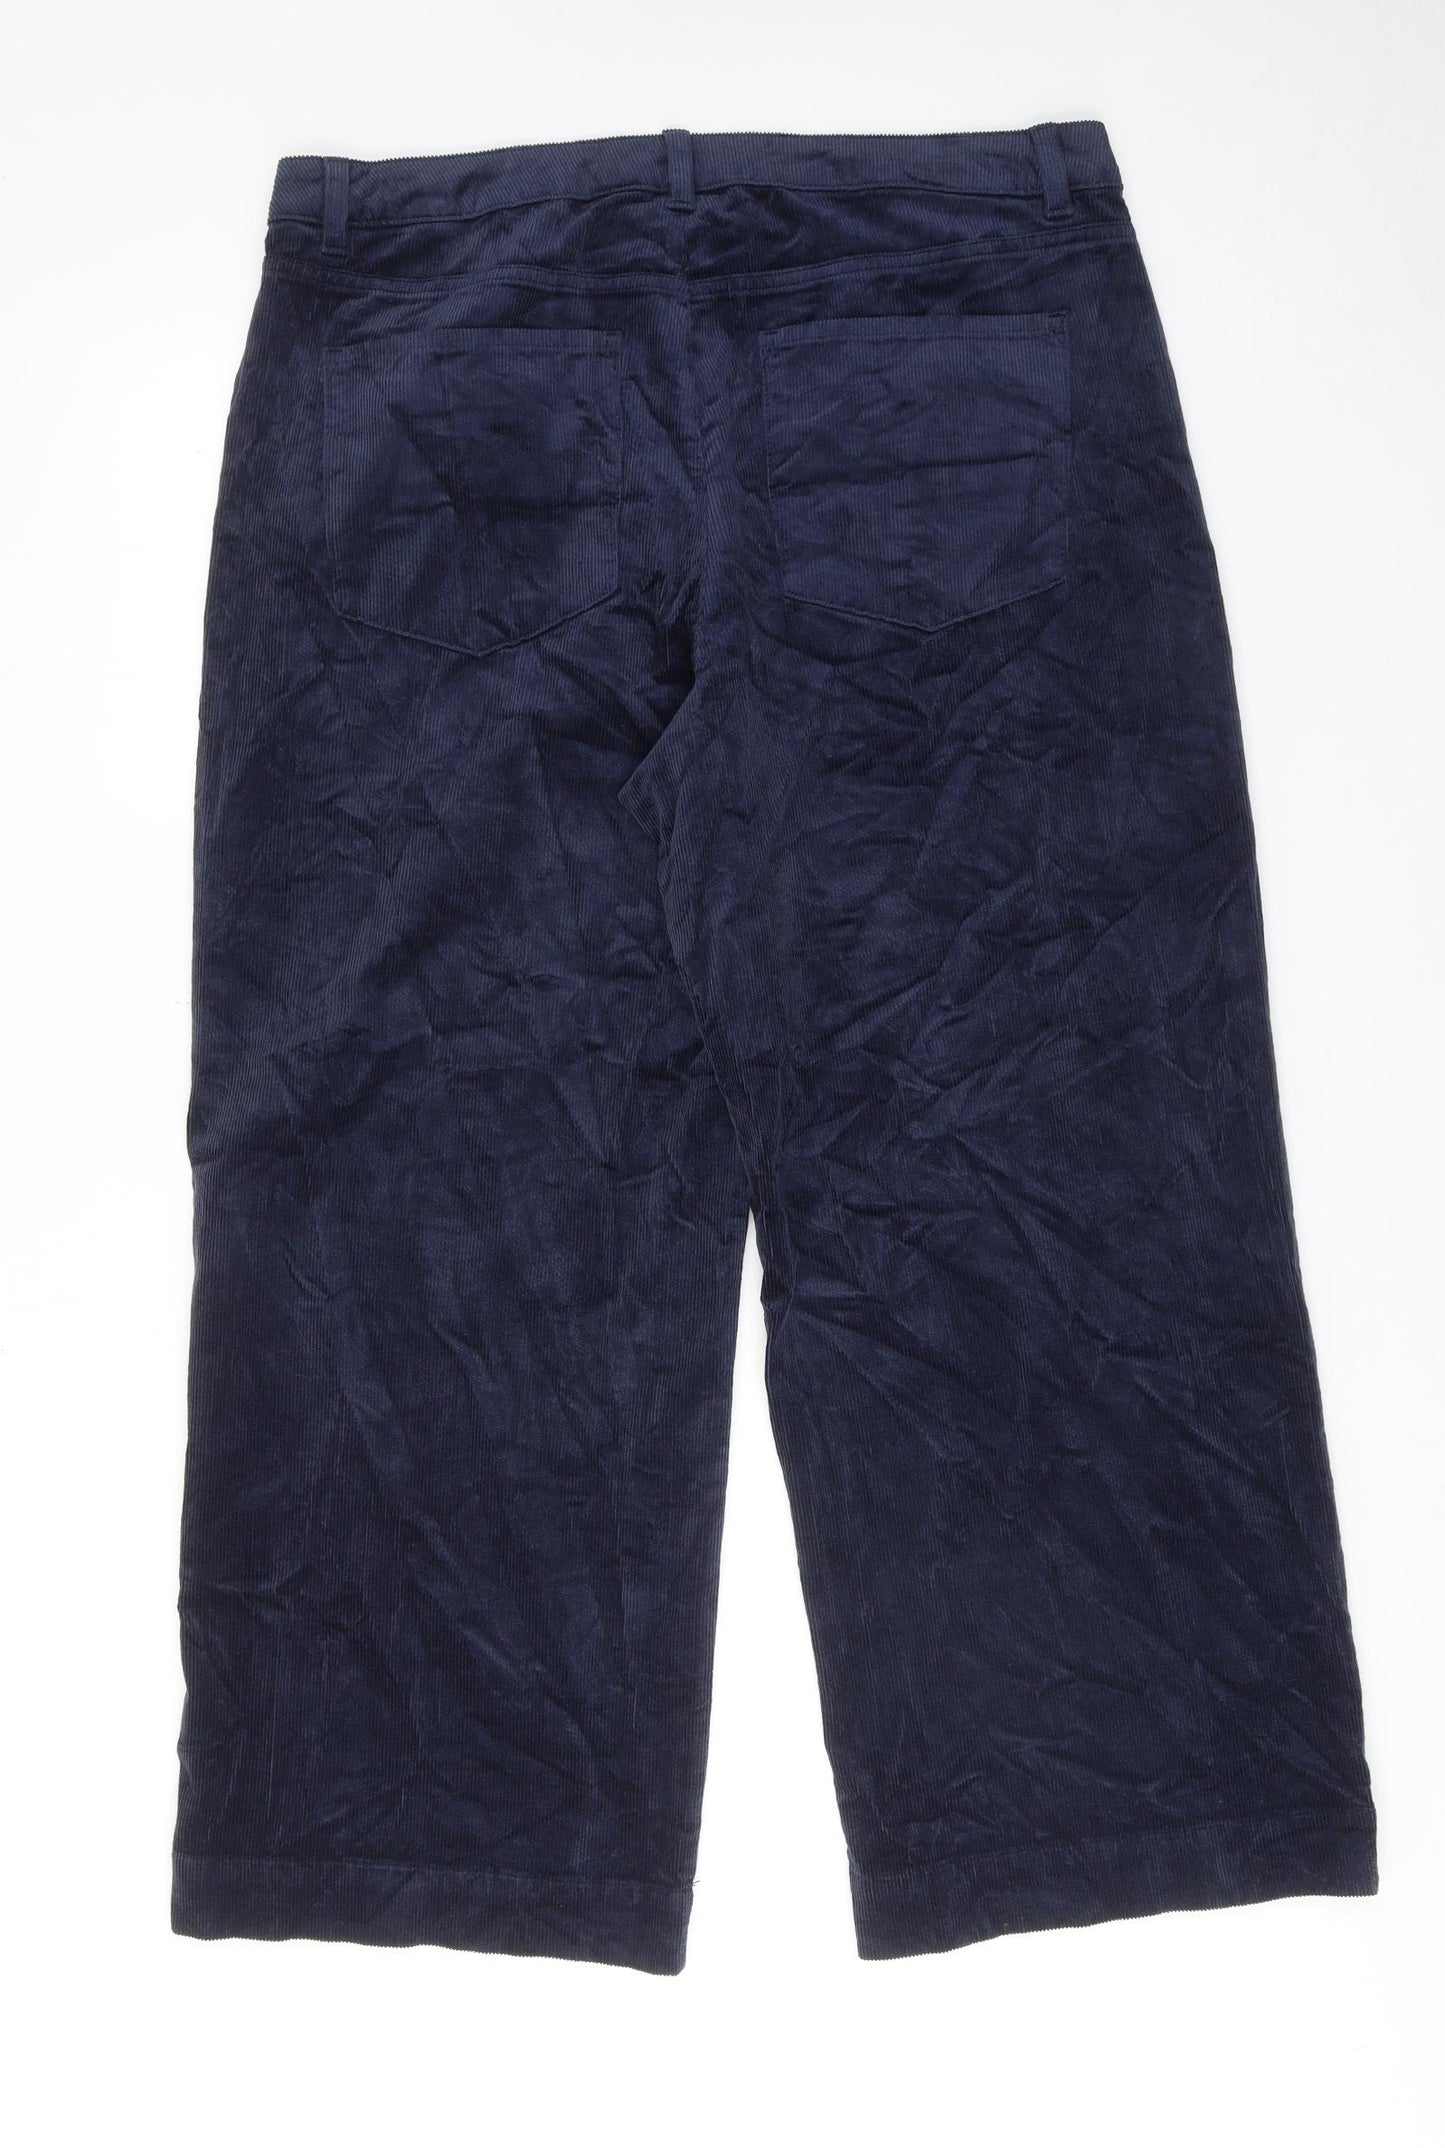 Marks and Spencer Womens Blue Cotton Trousers Size 18 Regular Zip